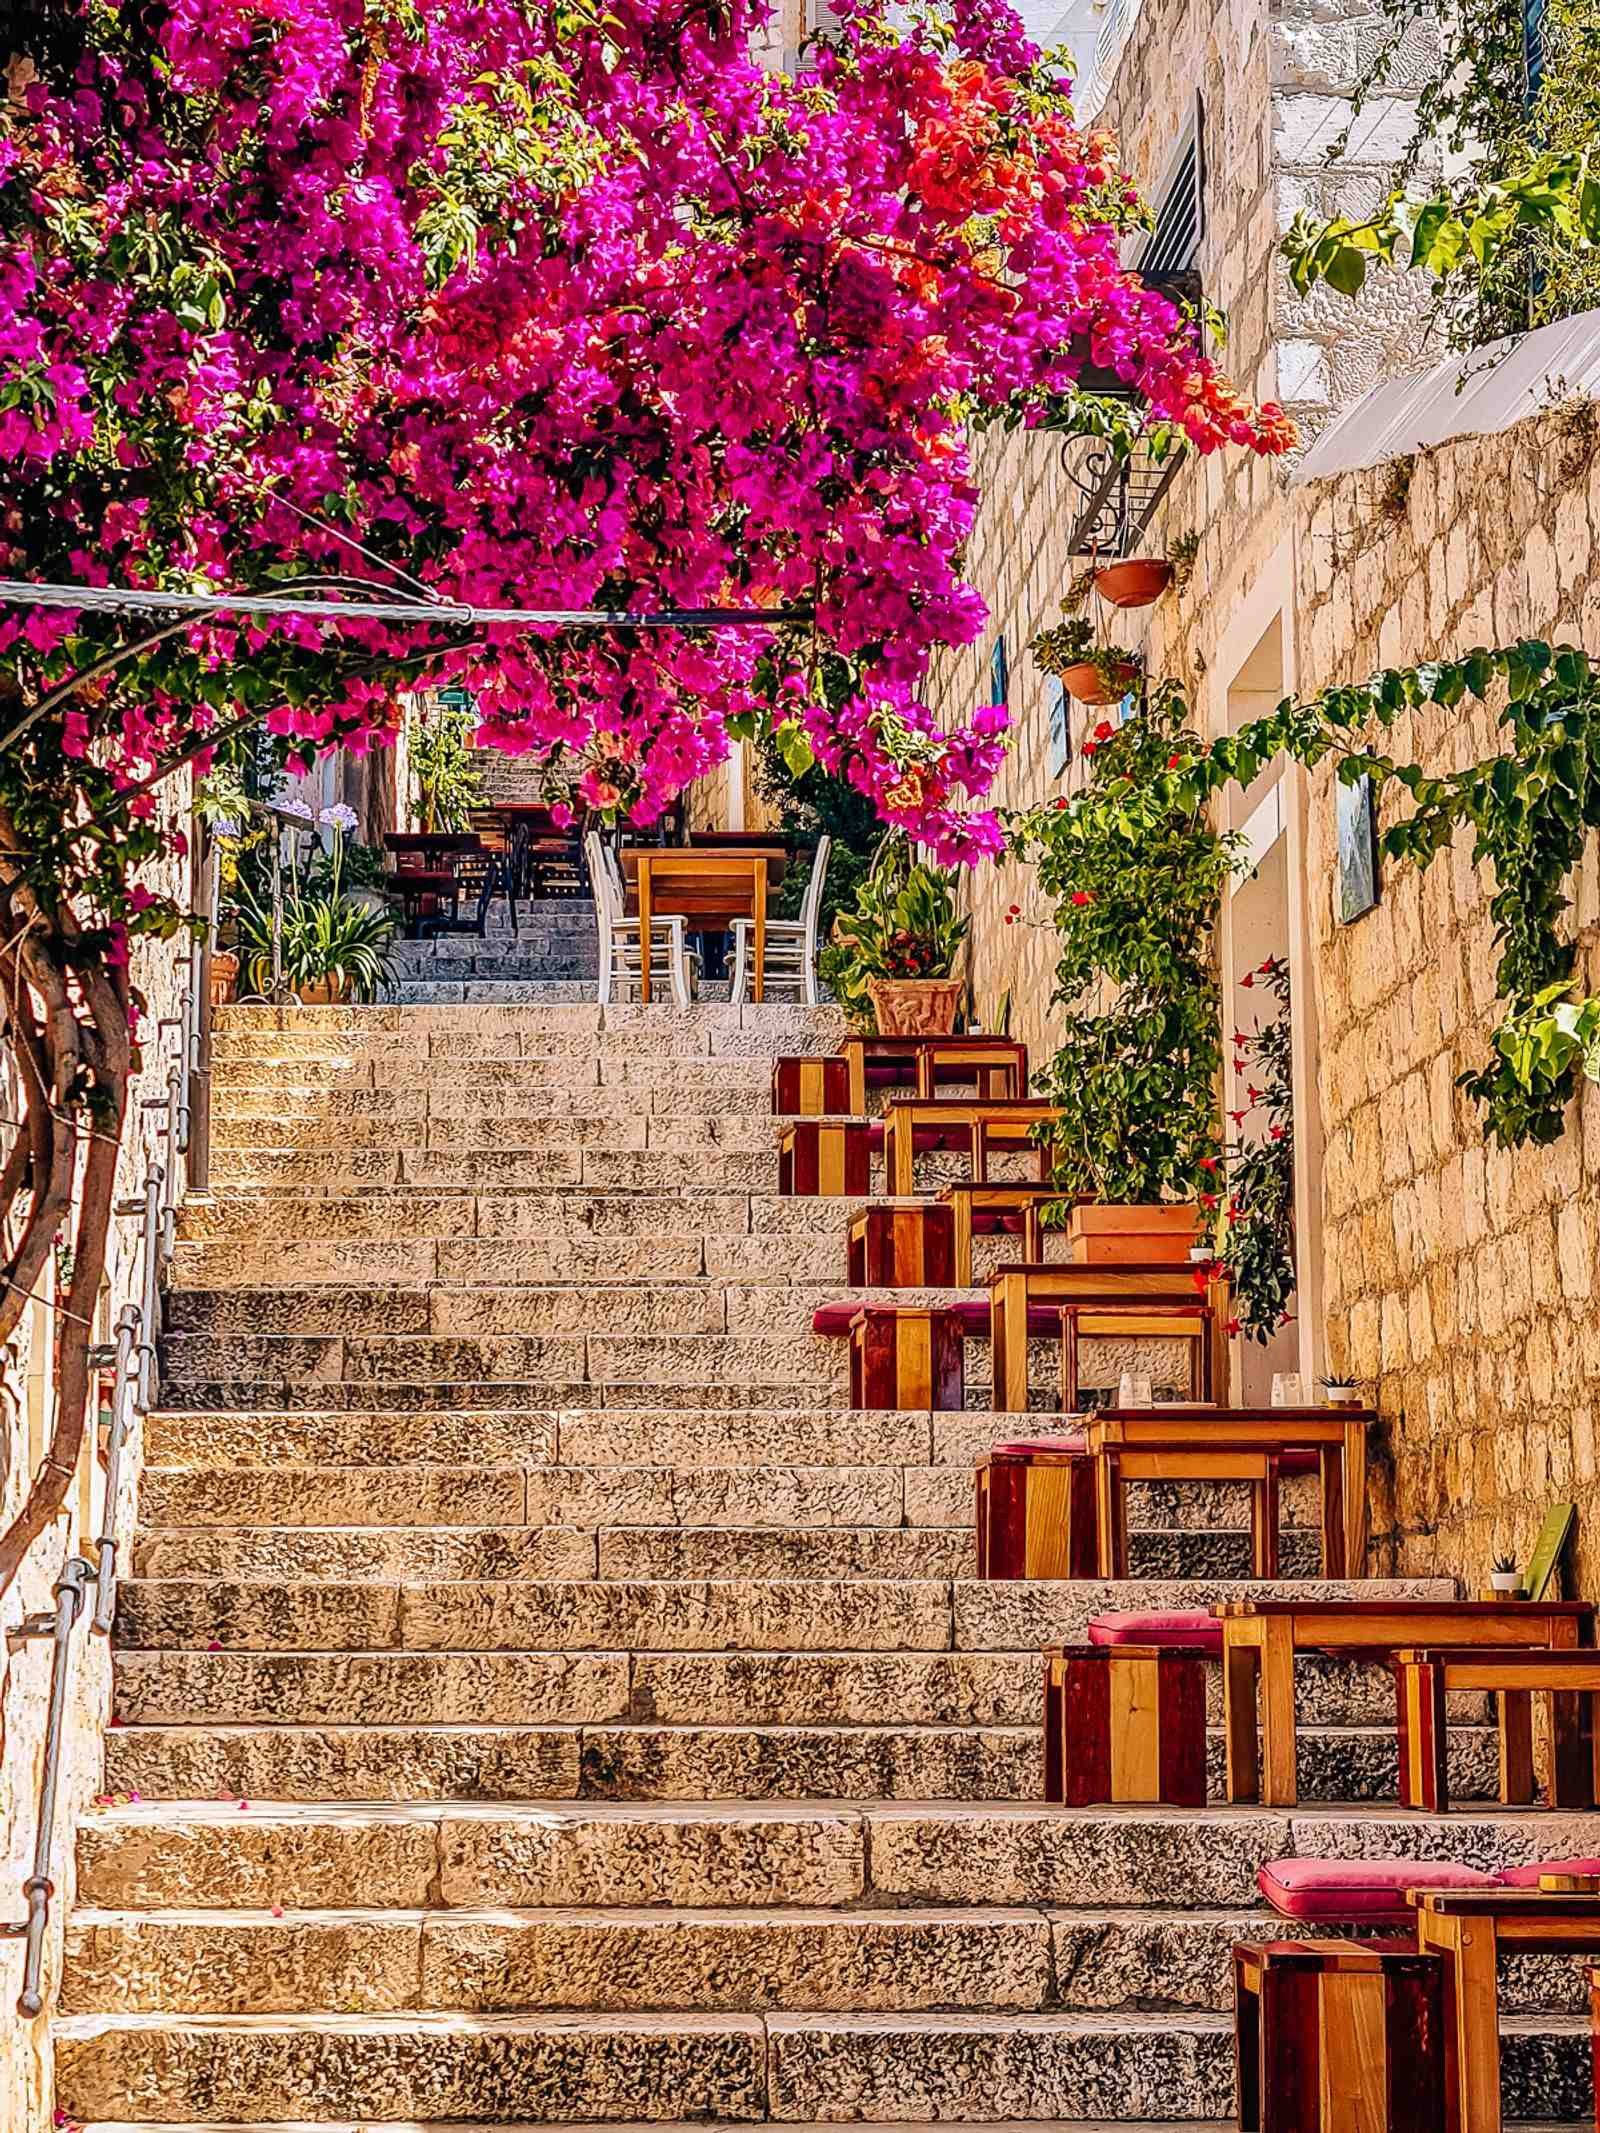 Dozens of wooden dining tables lining stone steps up the street in Hvar with pink bougainvillea hanging over the steps